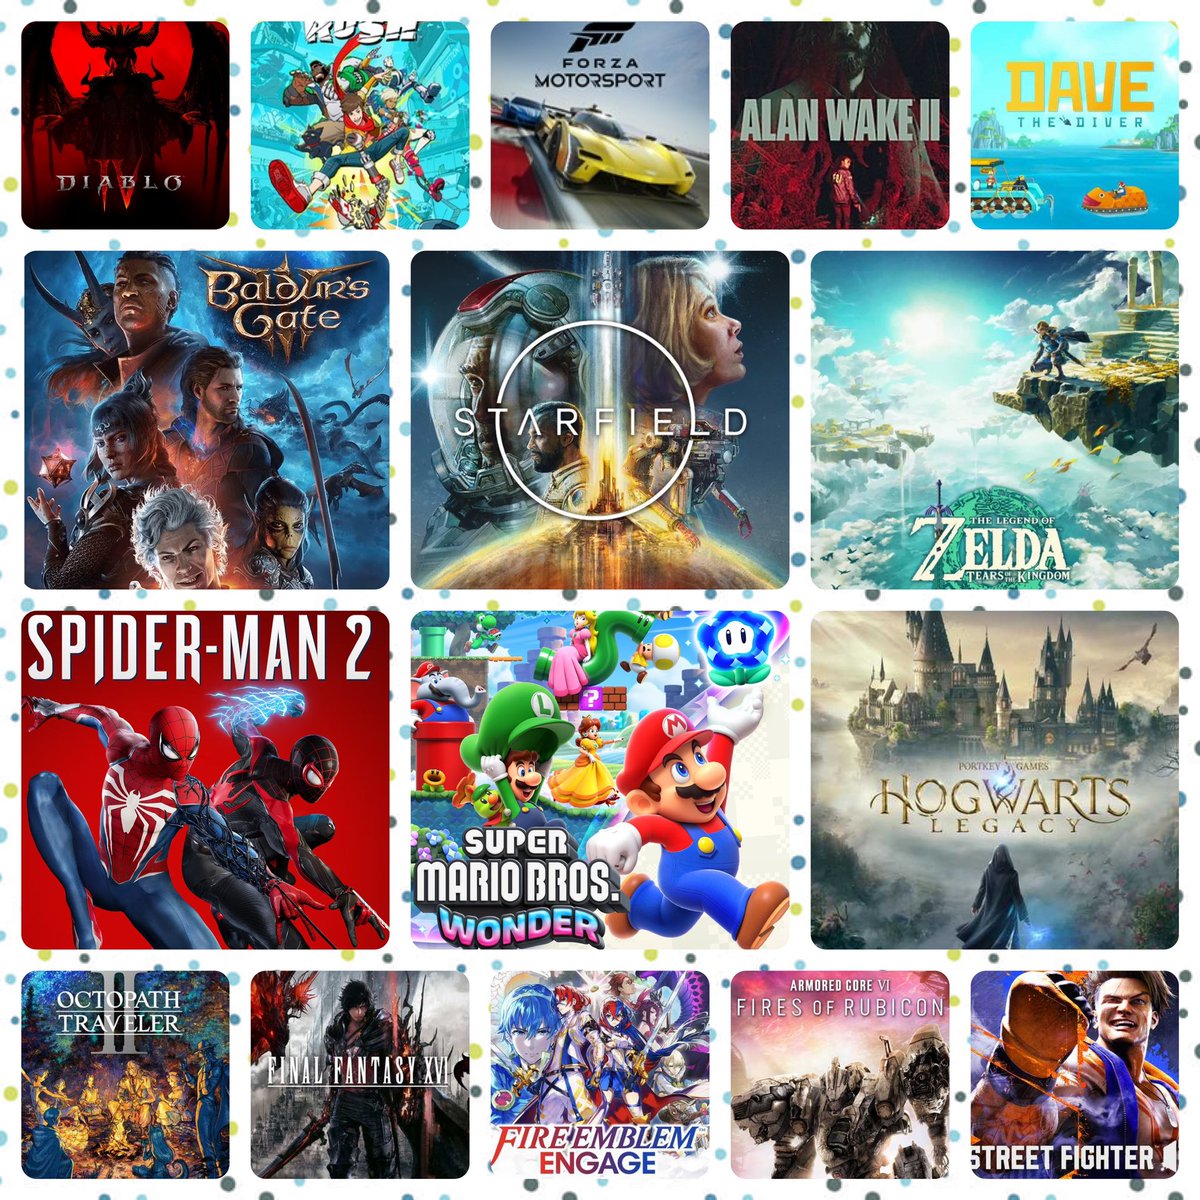 💚Good morning gamers💚

Can we just appreciate that we have had the BEST year in all of gaming history!!!

WILD!

#Xbox
#XboxGamePass
#Playstation5
#Nintendo 
#PC